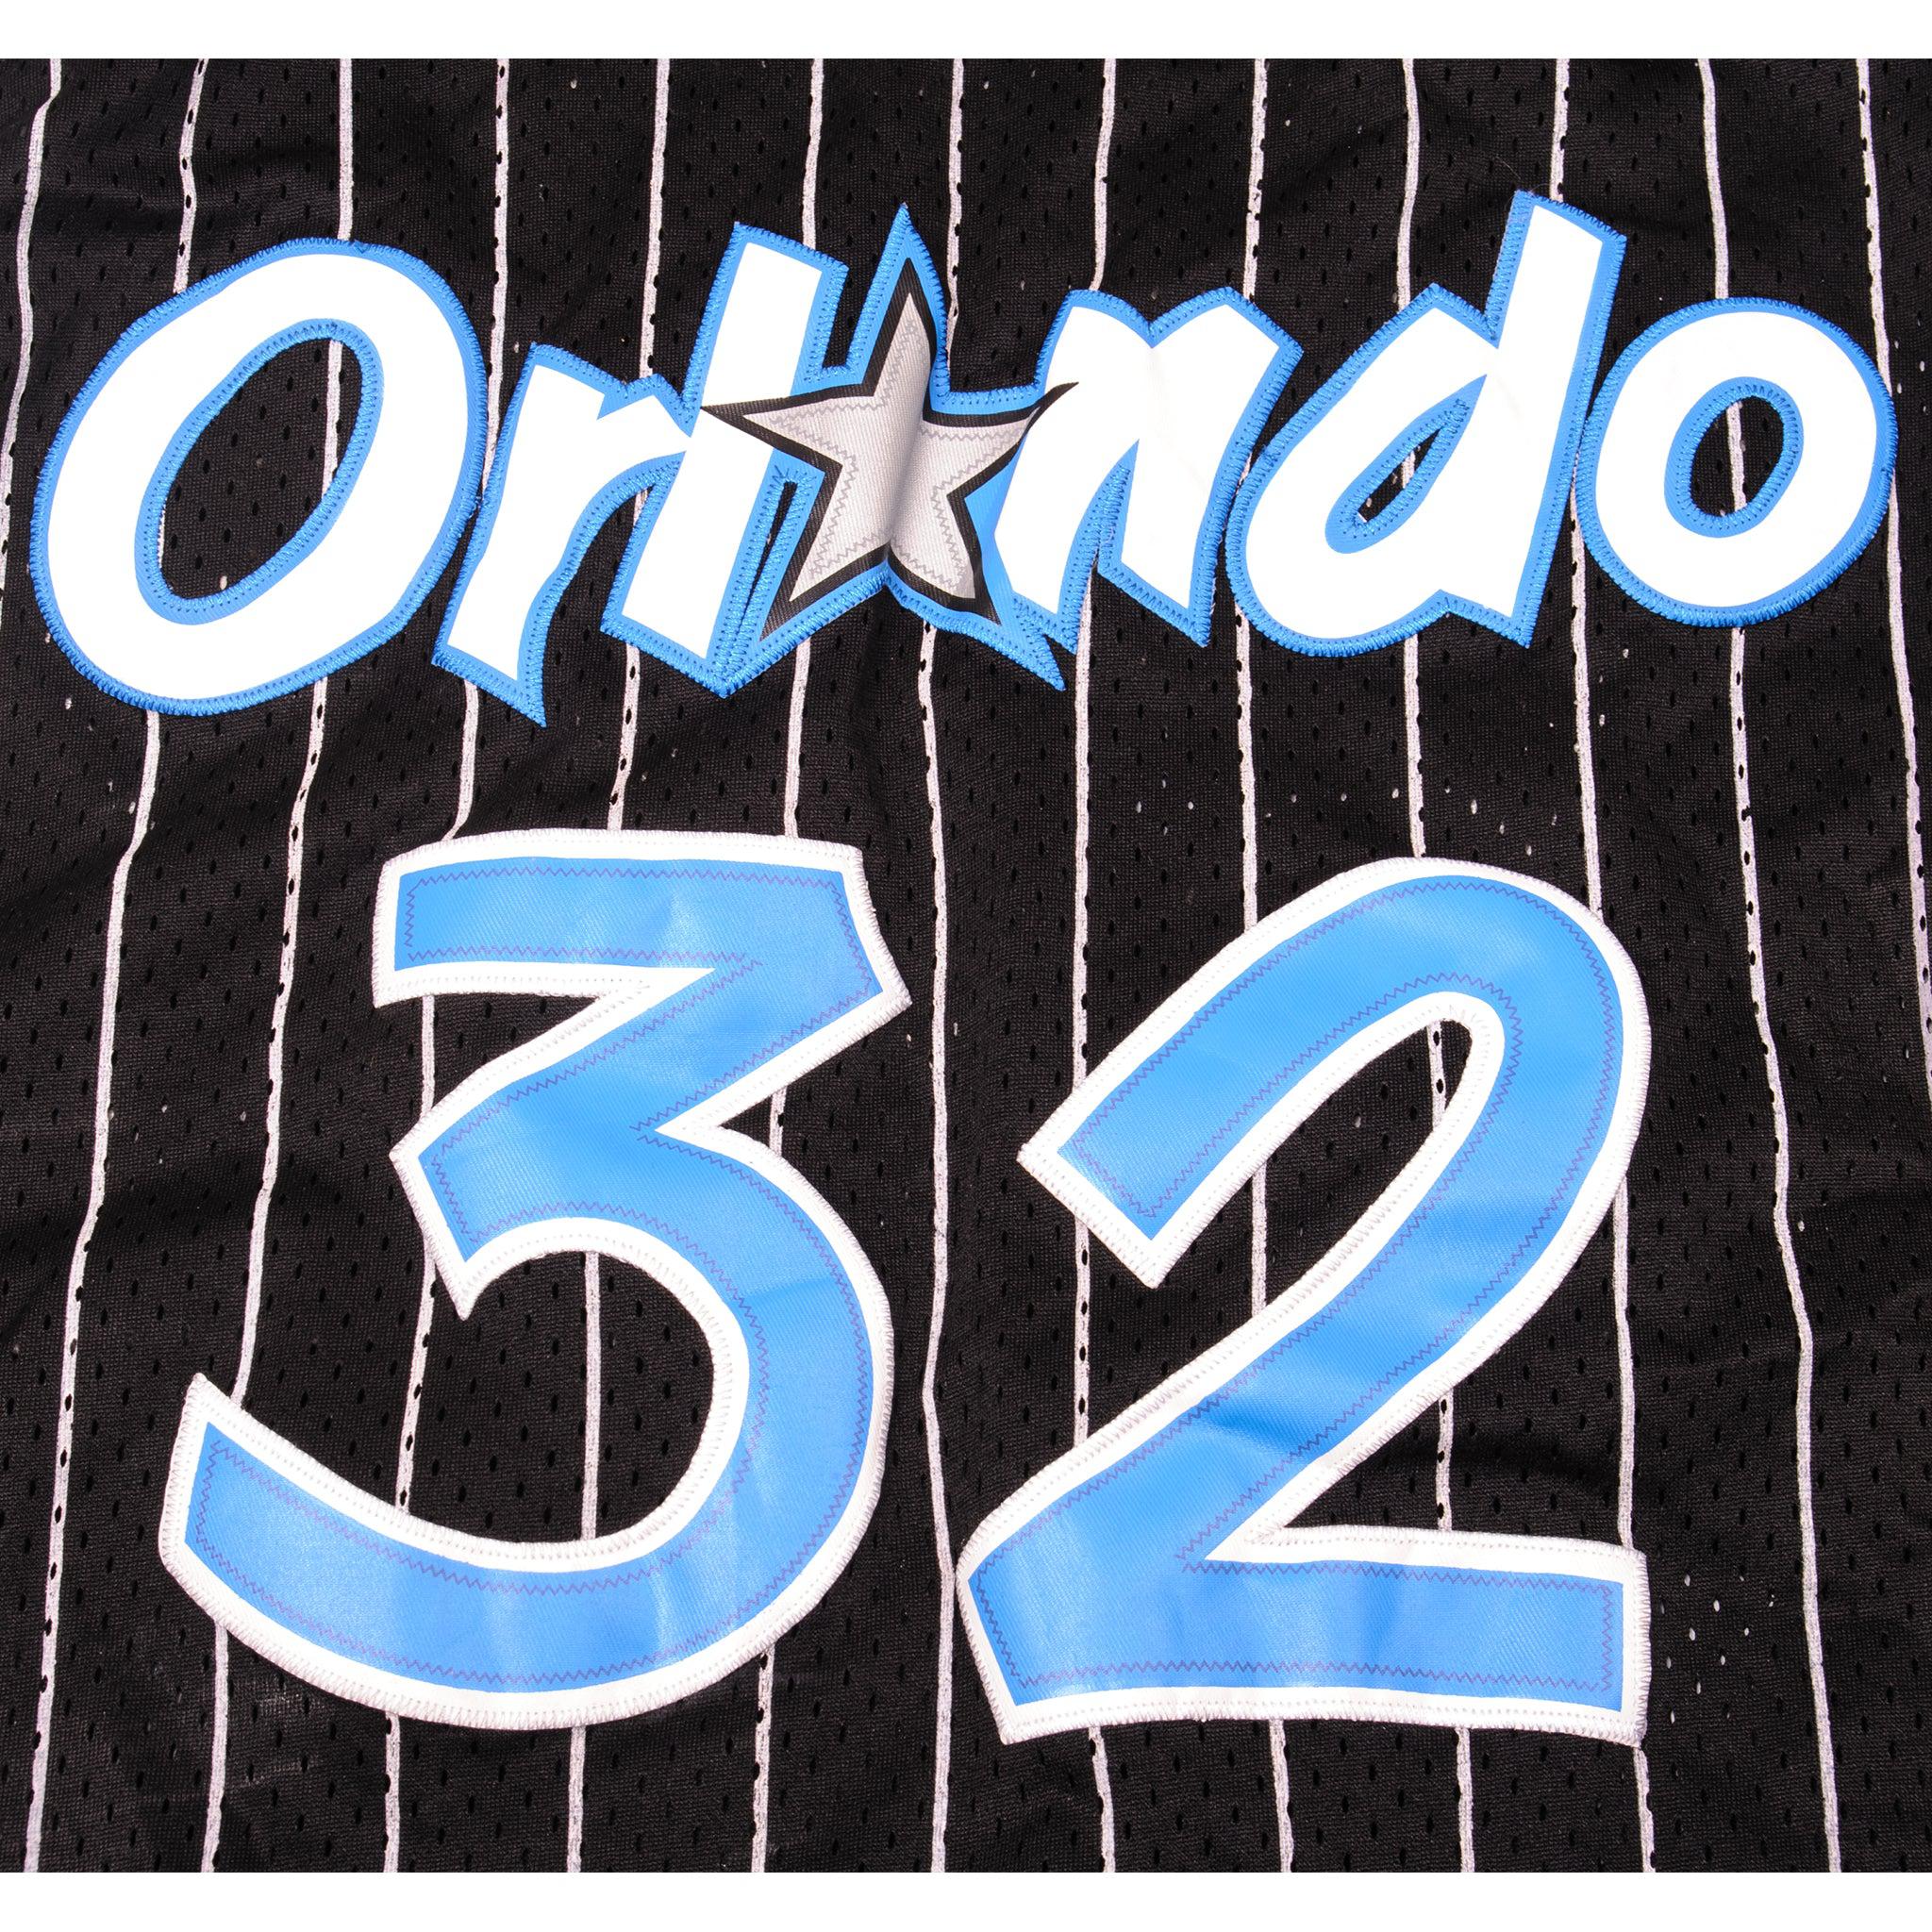 Vintage Orlando Magic Shaquille O'Neal #32 youth jersey size XL